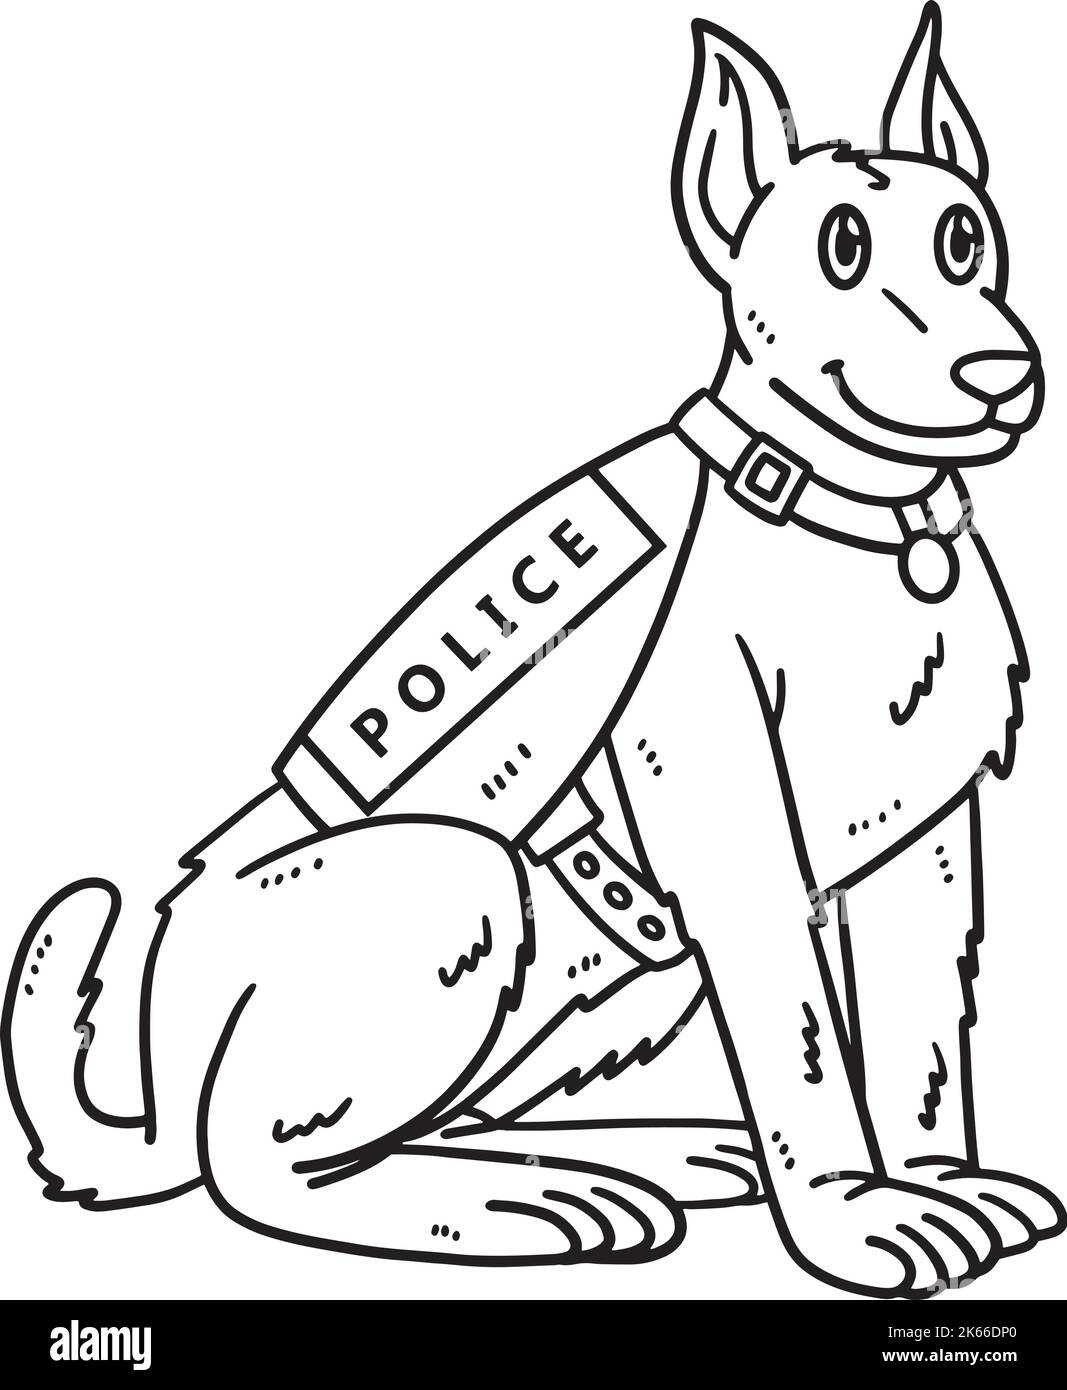 Police Dog Isolated Coloring Page for Kids Stock Vector